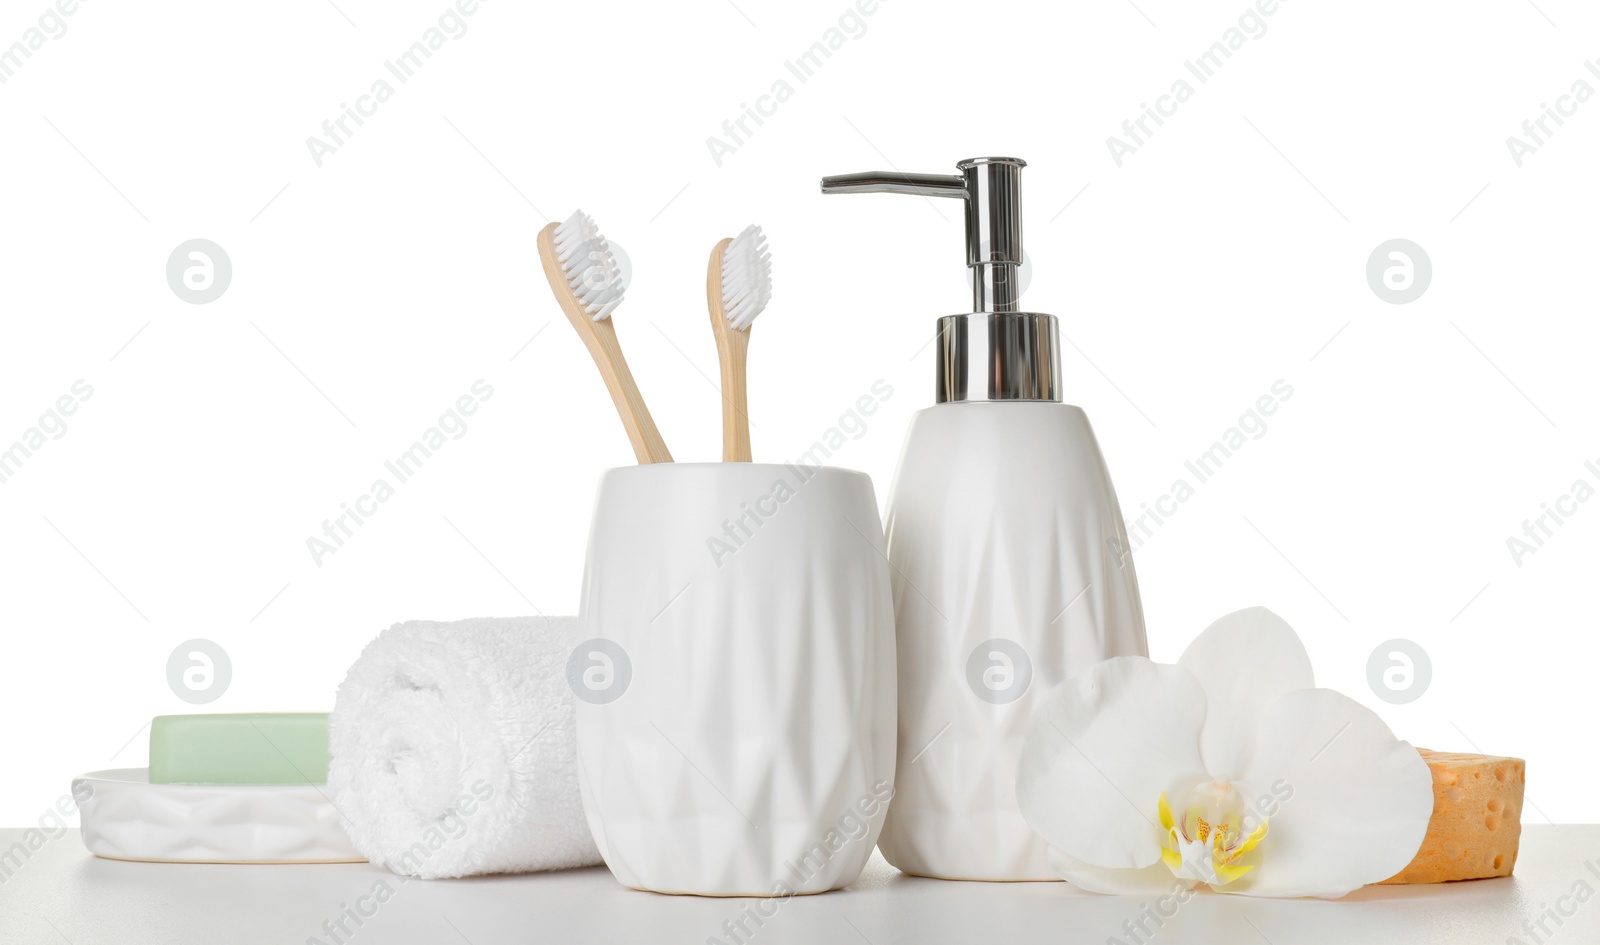 Photo of Bath accessories. Different personal care products and flower on table against white background